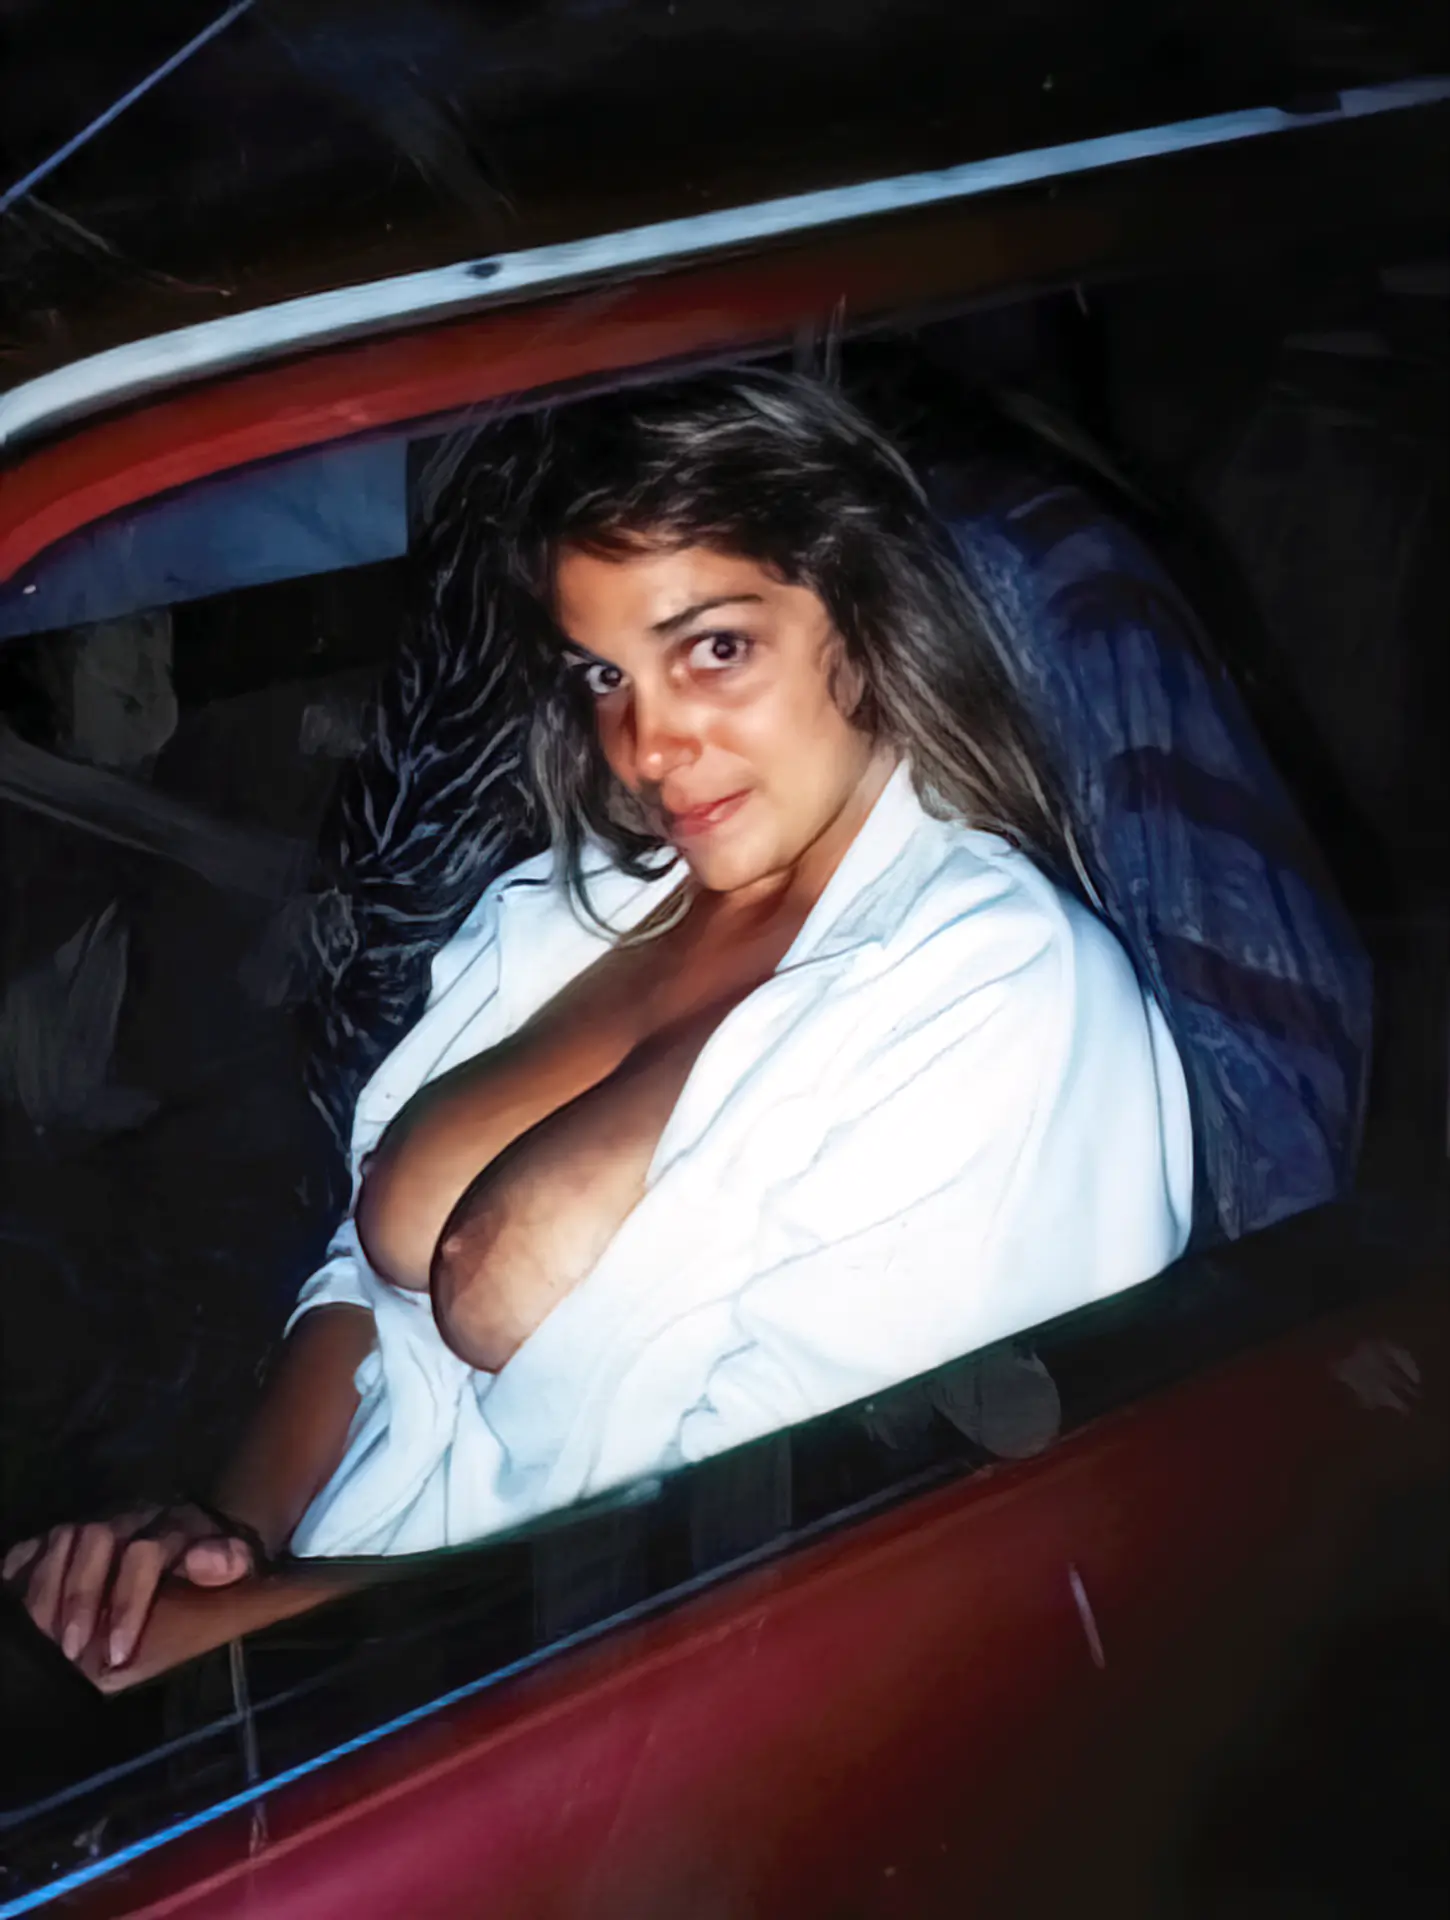 Confused classic babe in a car exposes her bare soft breasts